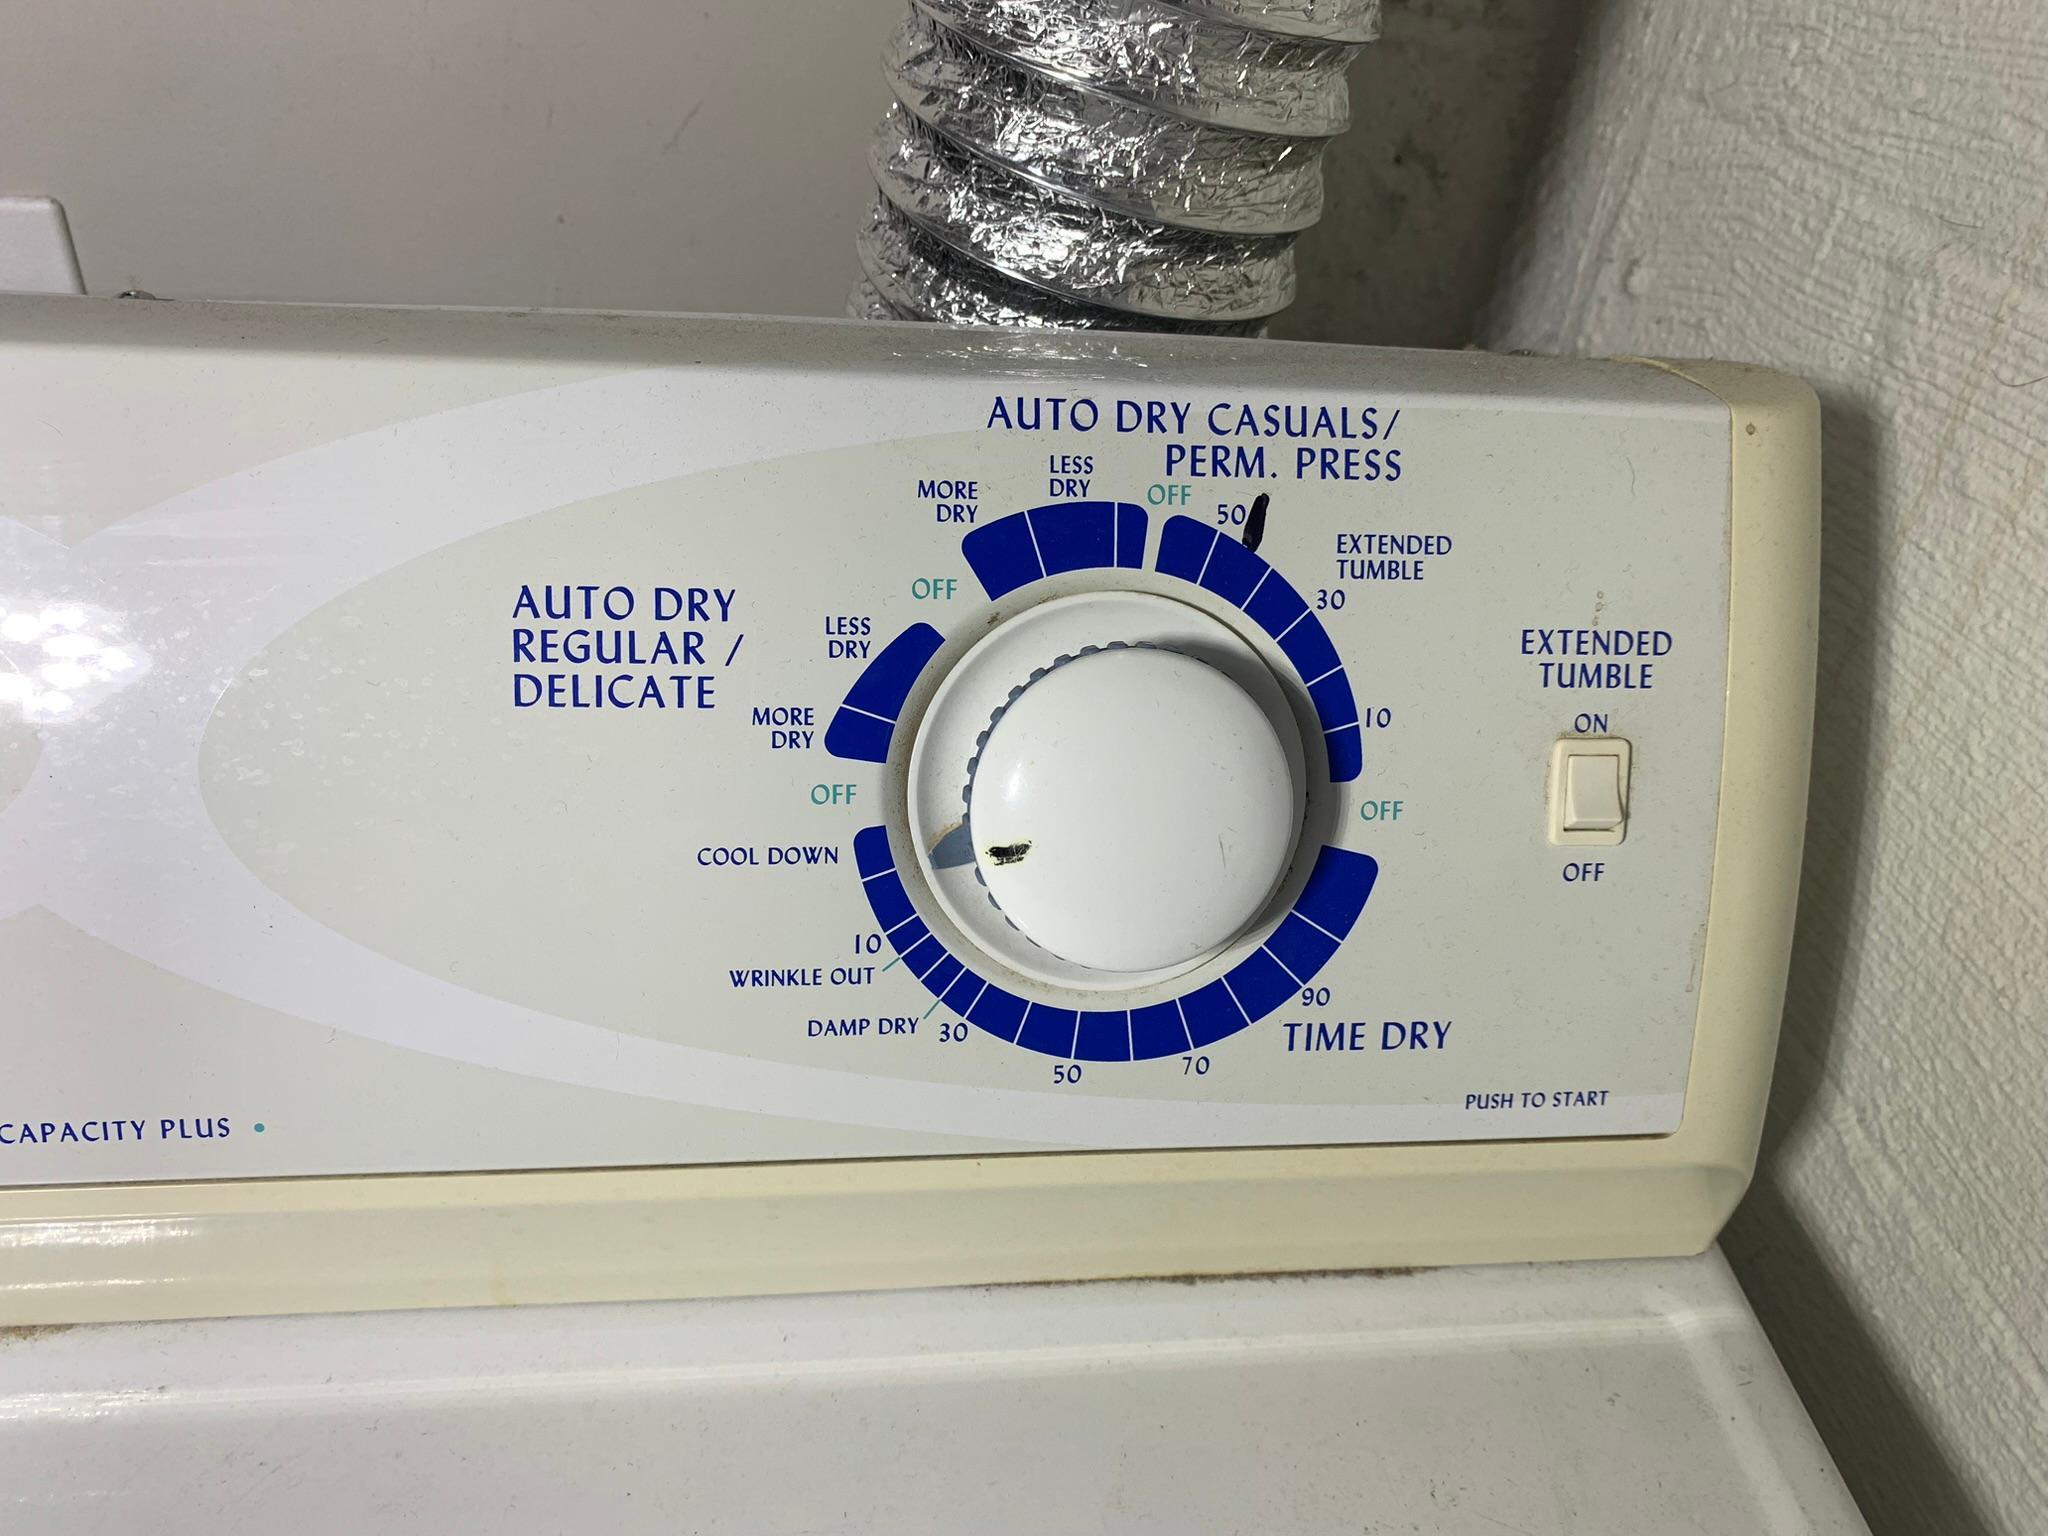 GE Washer & Amana Electric Dryer